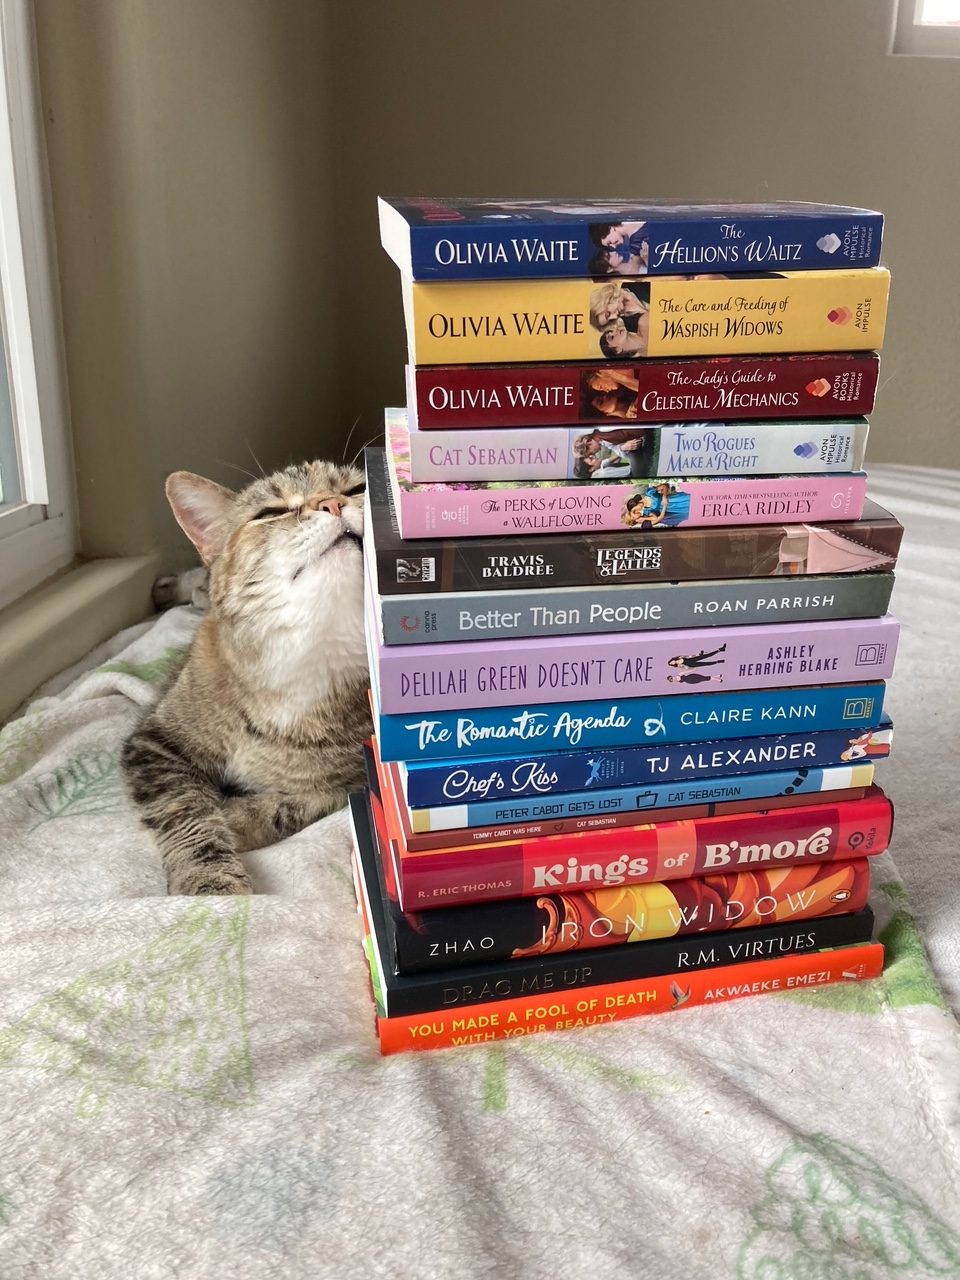 A brown-and-white tabby cat (Tib) rubbing against a tall stack of books (my TBR pile), while laying on a very cat-hair covered blanket on a bed